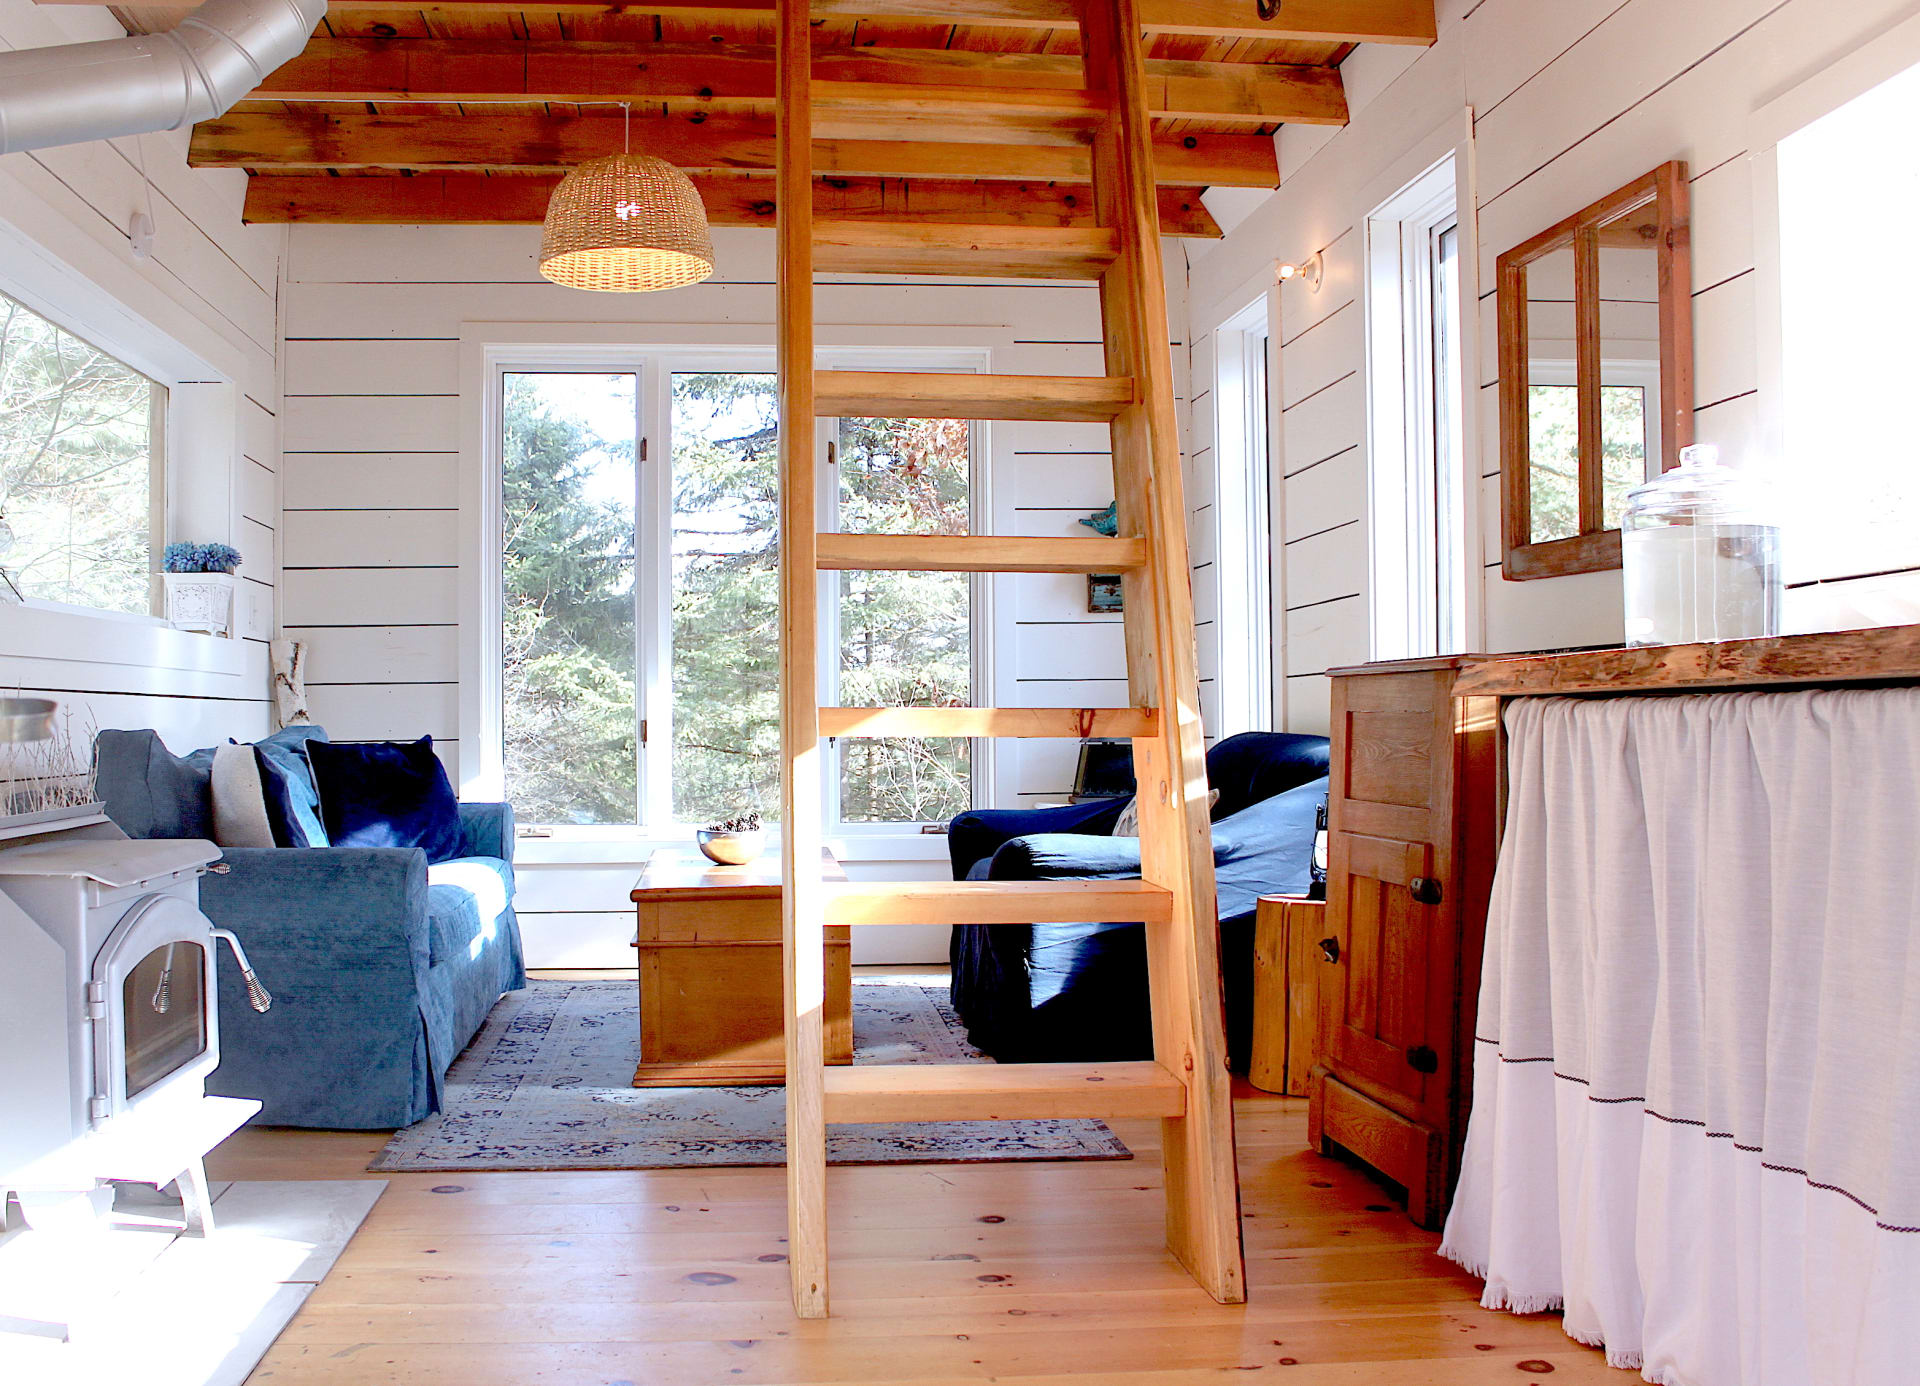 Welcome to the 'Cozy Cabin' at Deer Lake Wilderness Retreat!